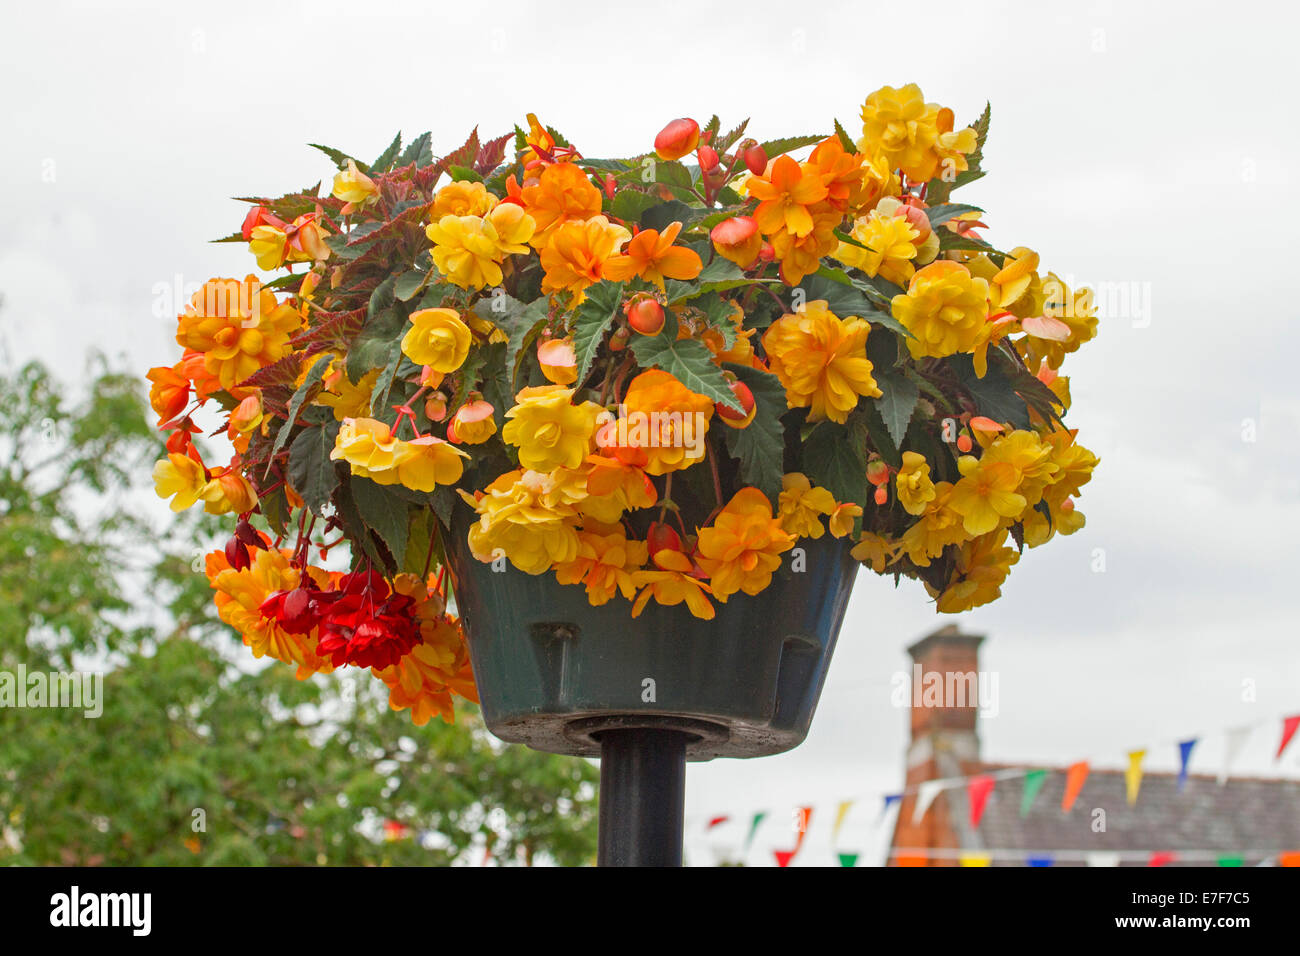 Hanging basket with mass of brightly coloured yellow and orange flowers of tuberous begonias against light blue sky Stock Photo